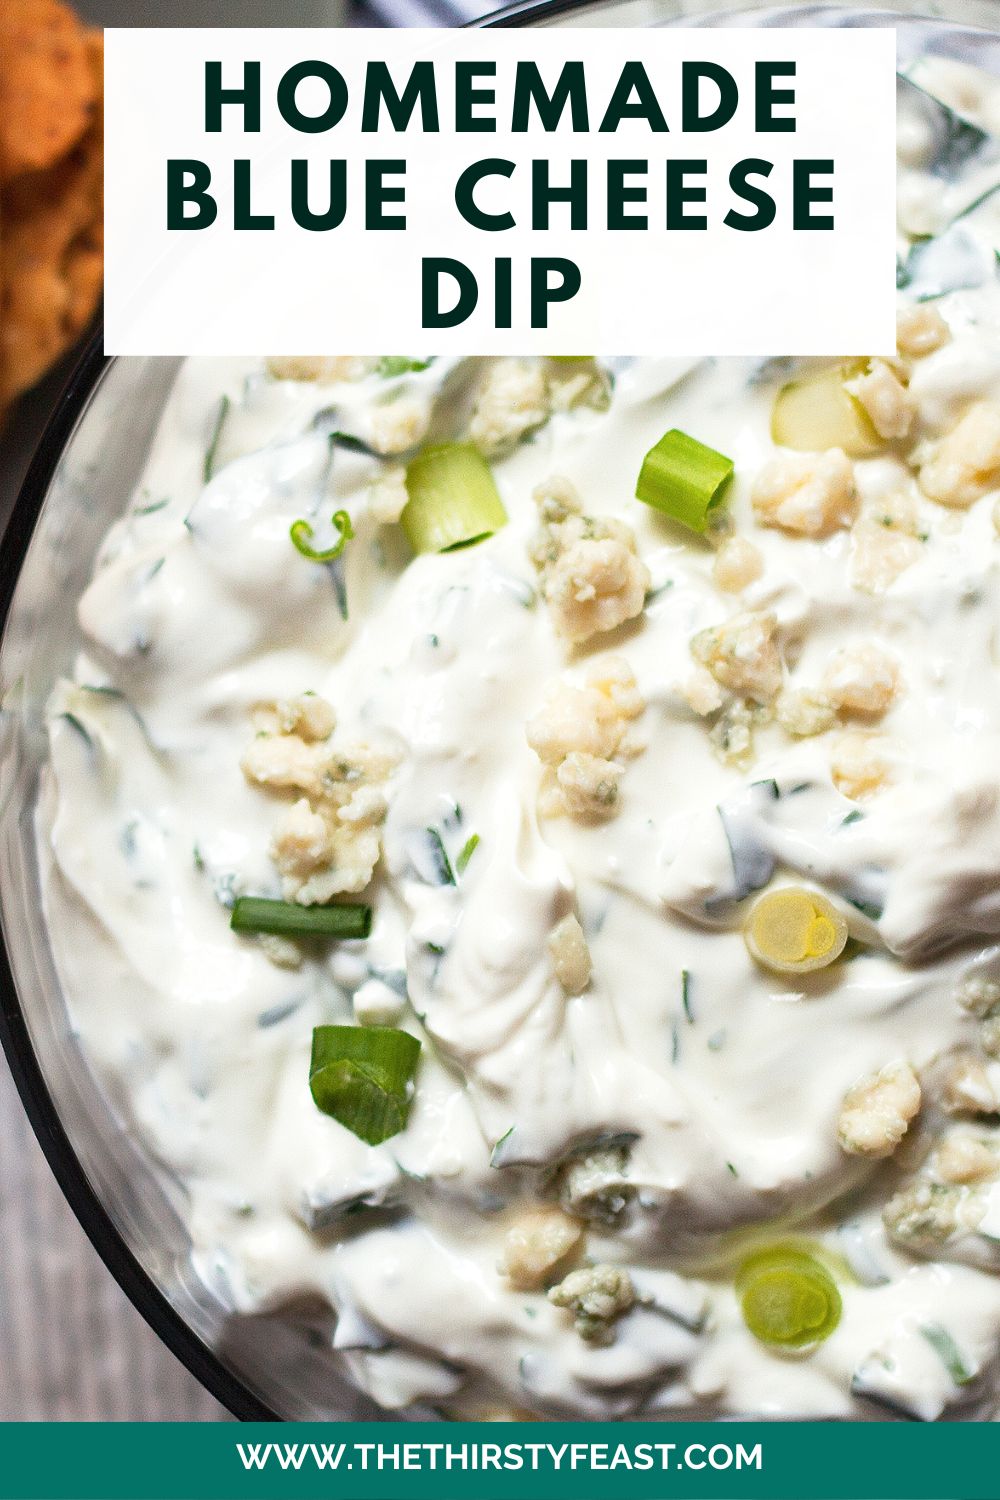 homemade blue cheese dip pinterest image. the bowl of blue cheese dip is zoomed in with a text caption at the top reading "homemade blue cheese dip"